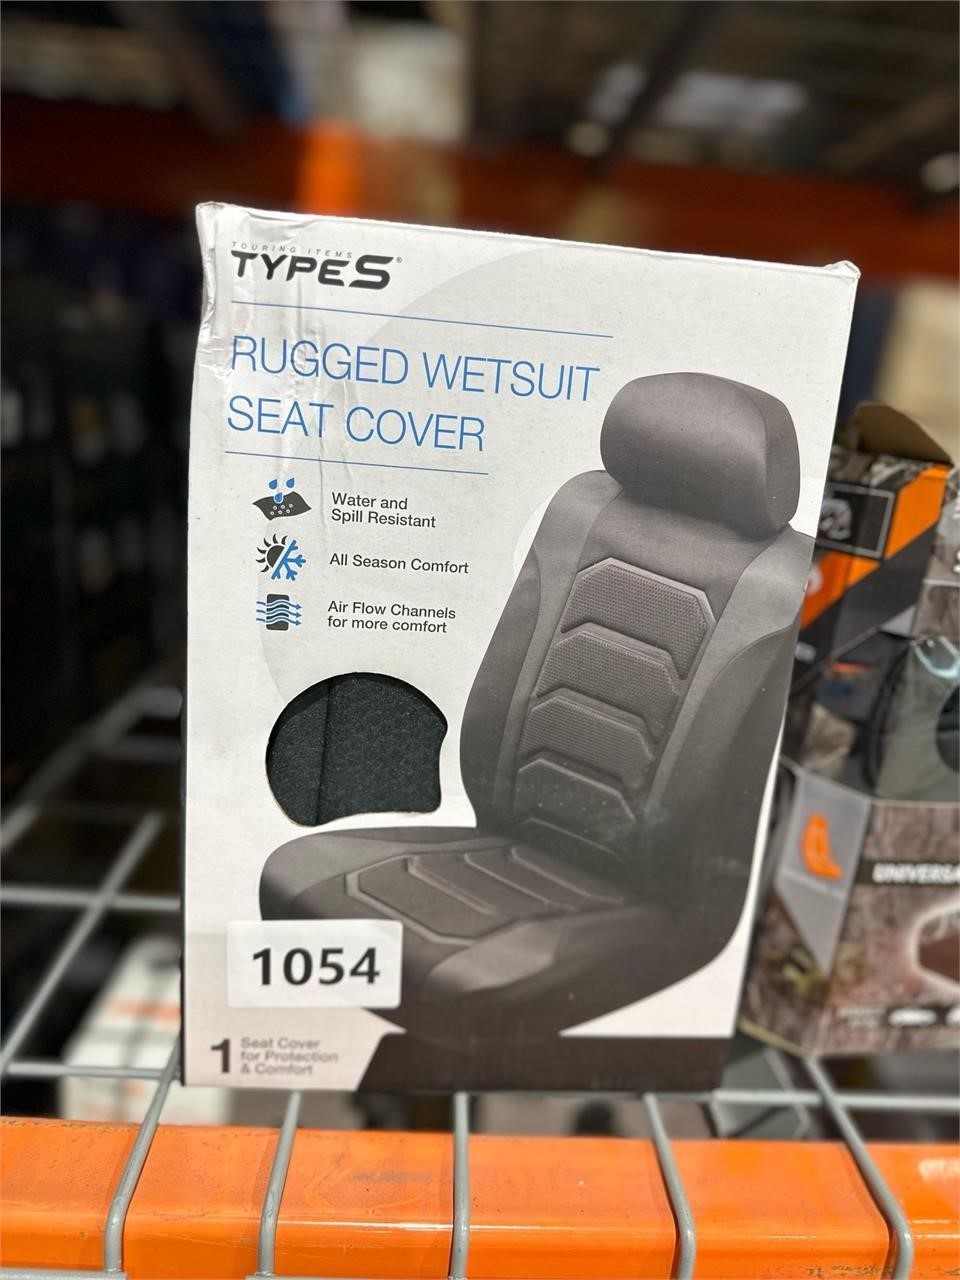 Rugged Wetsuit Seat Cover - 1 Type